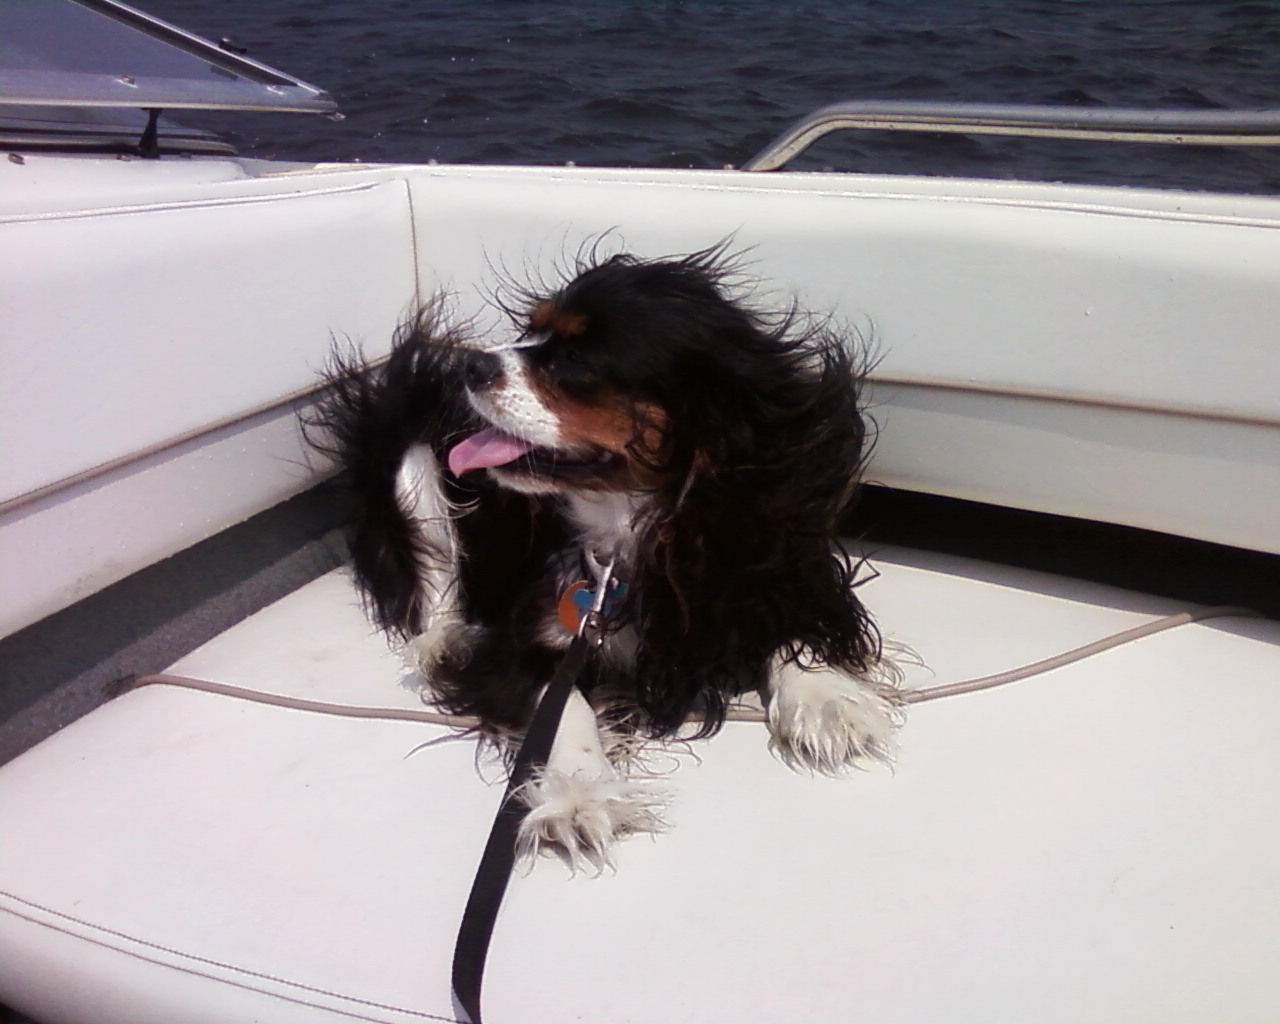 petey-on-the-boat